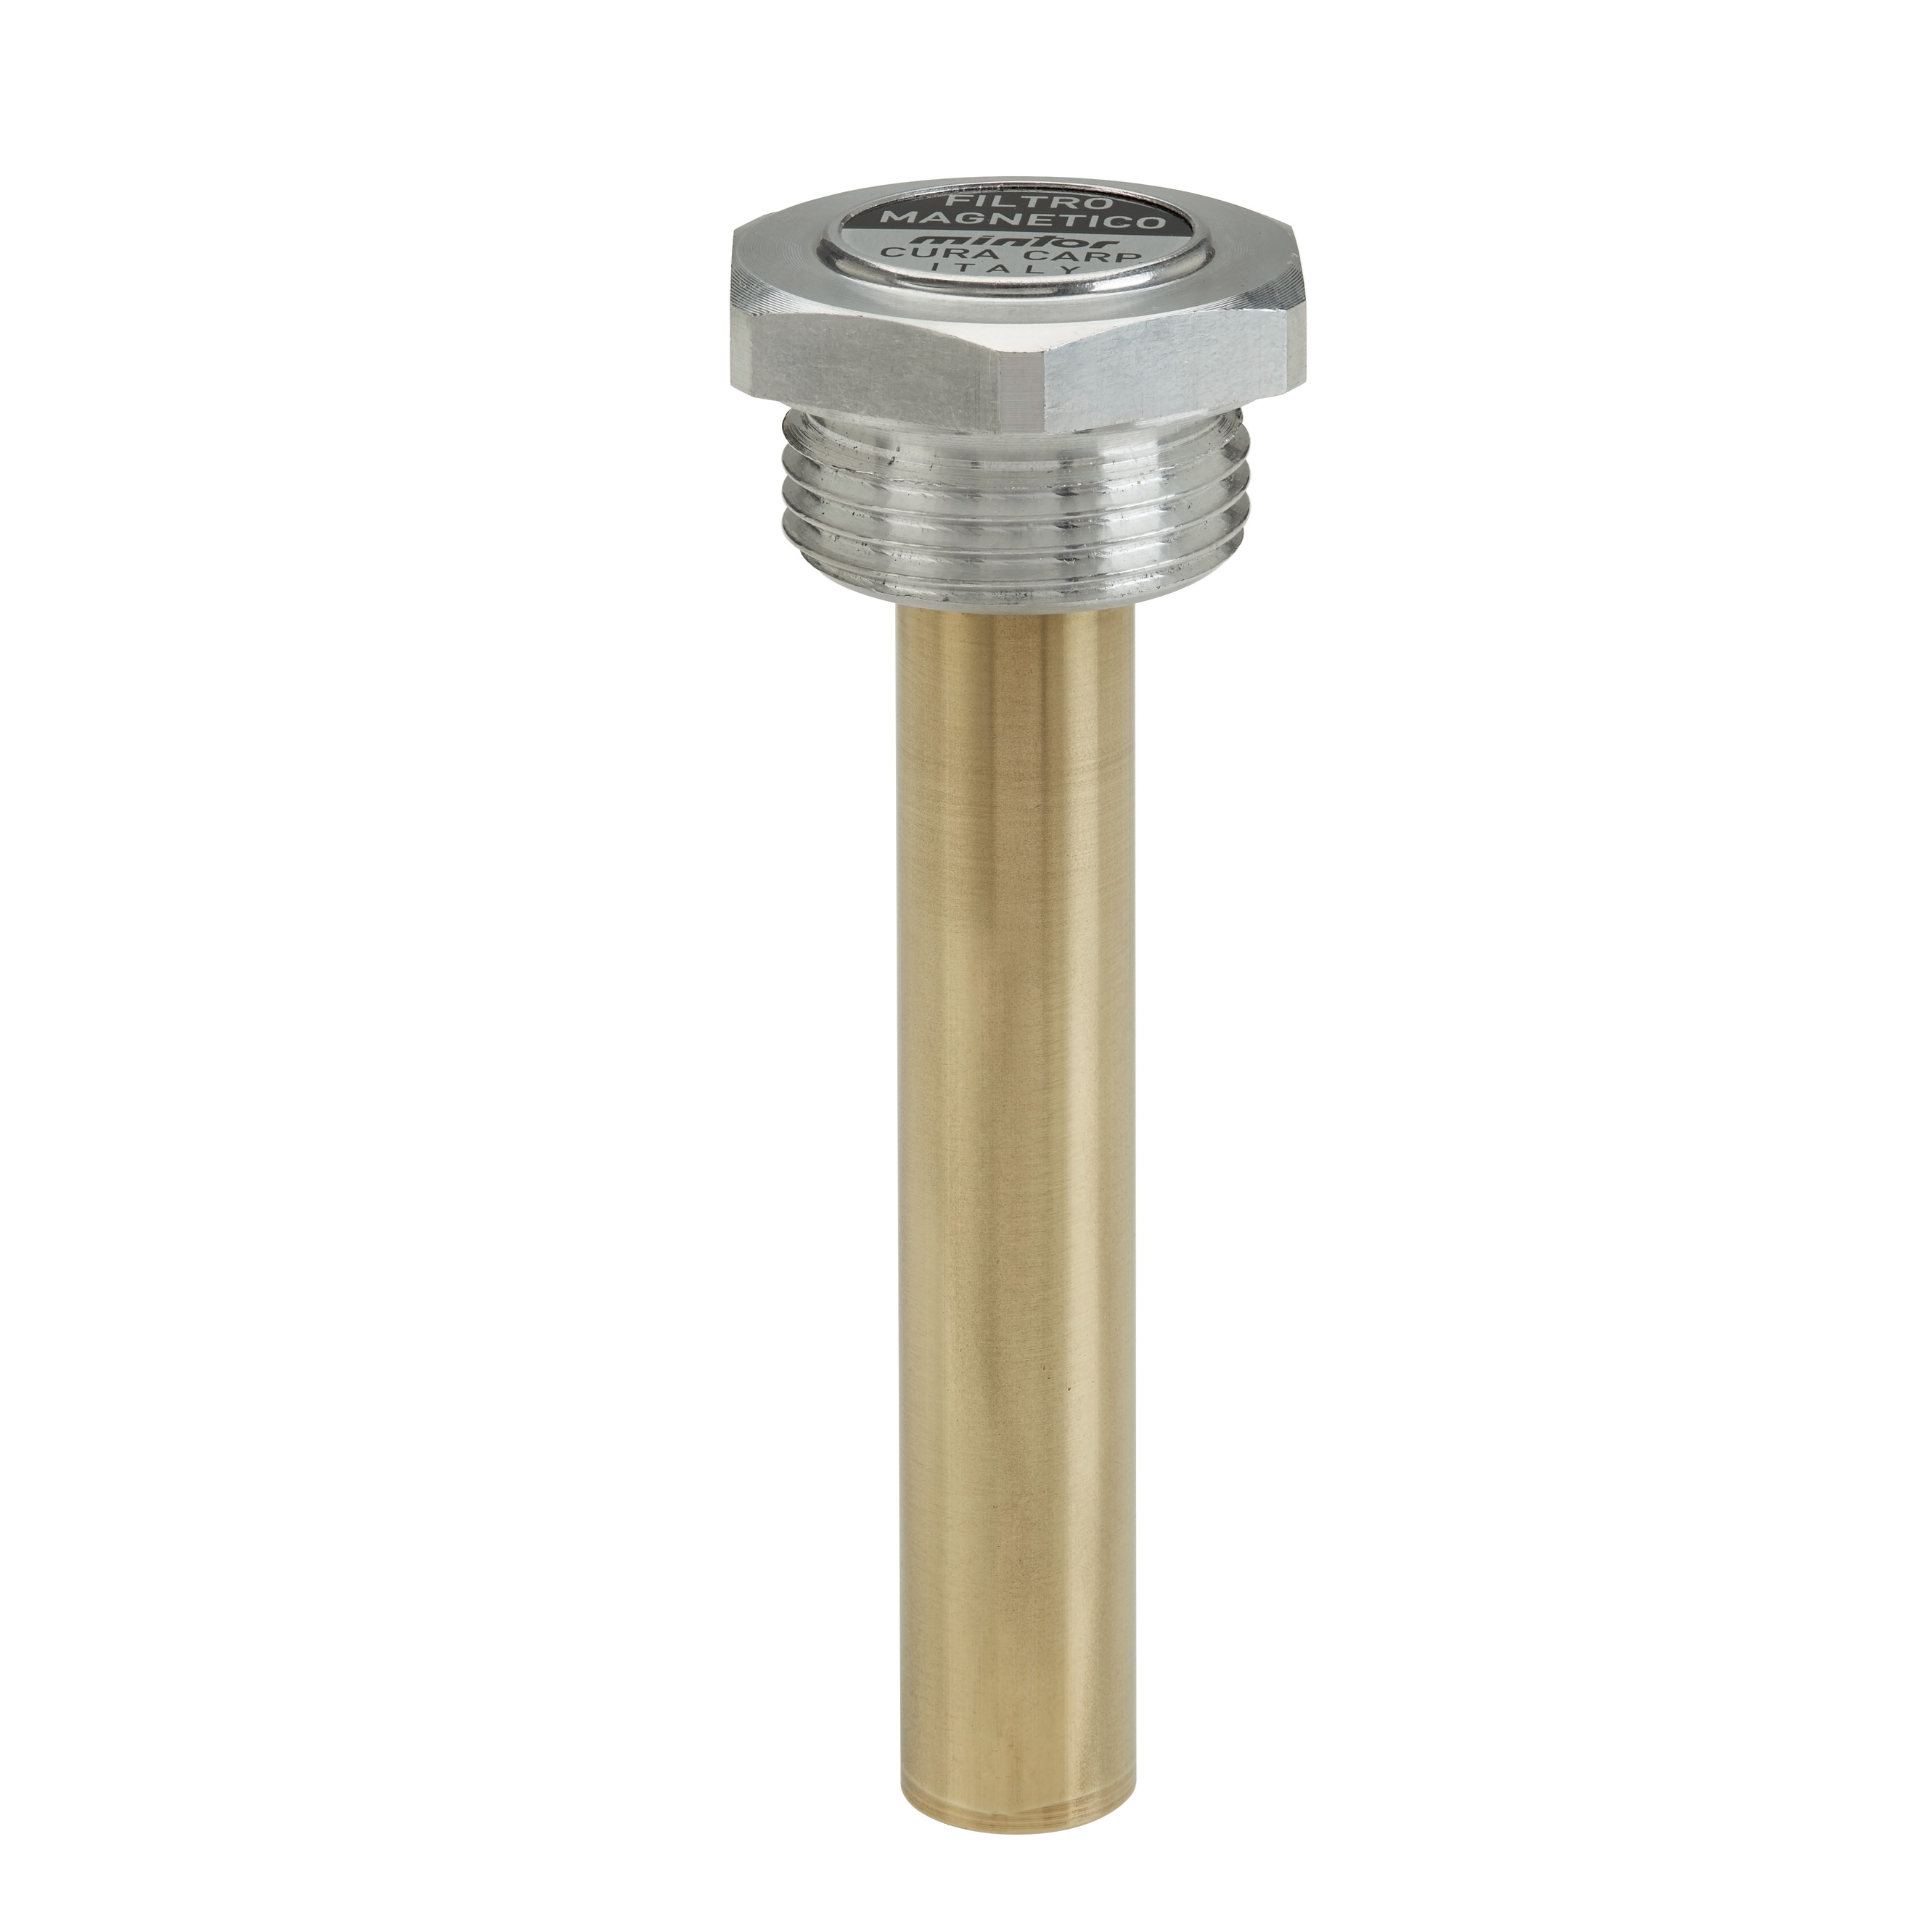 Hydraulic magnetic filter rod, 1/2" BSP